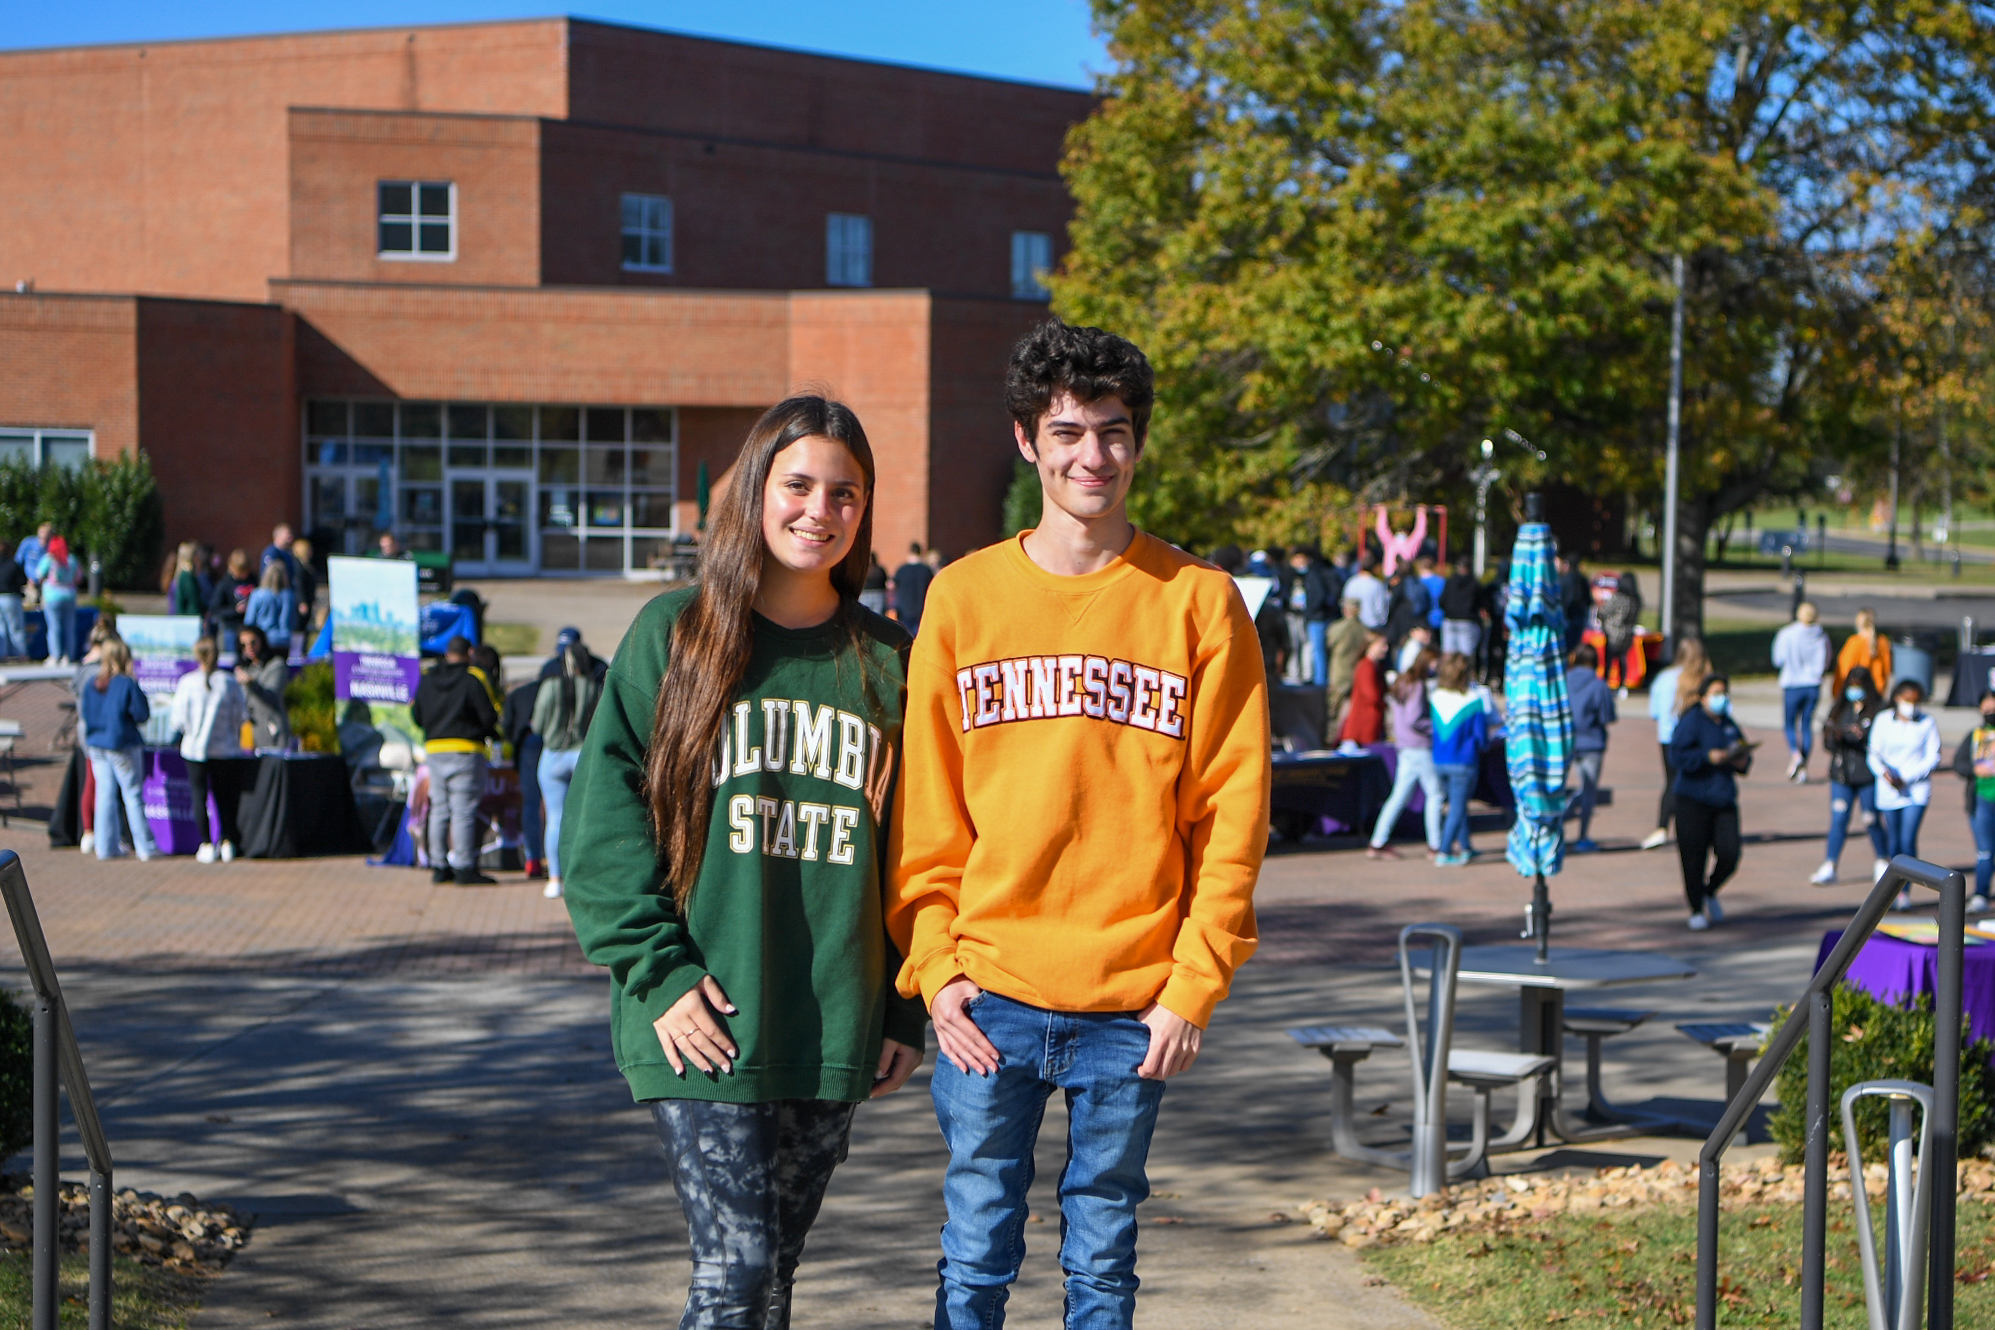 Columbia Central High School juniors Kiara Simerly and Mac Sanders attend the college fair at Columbia State.